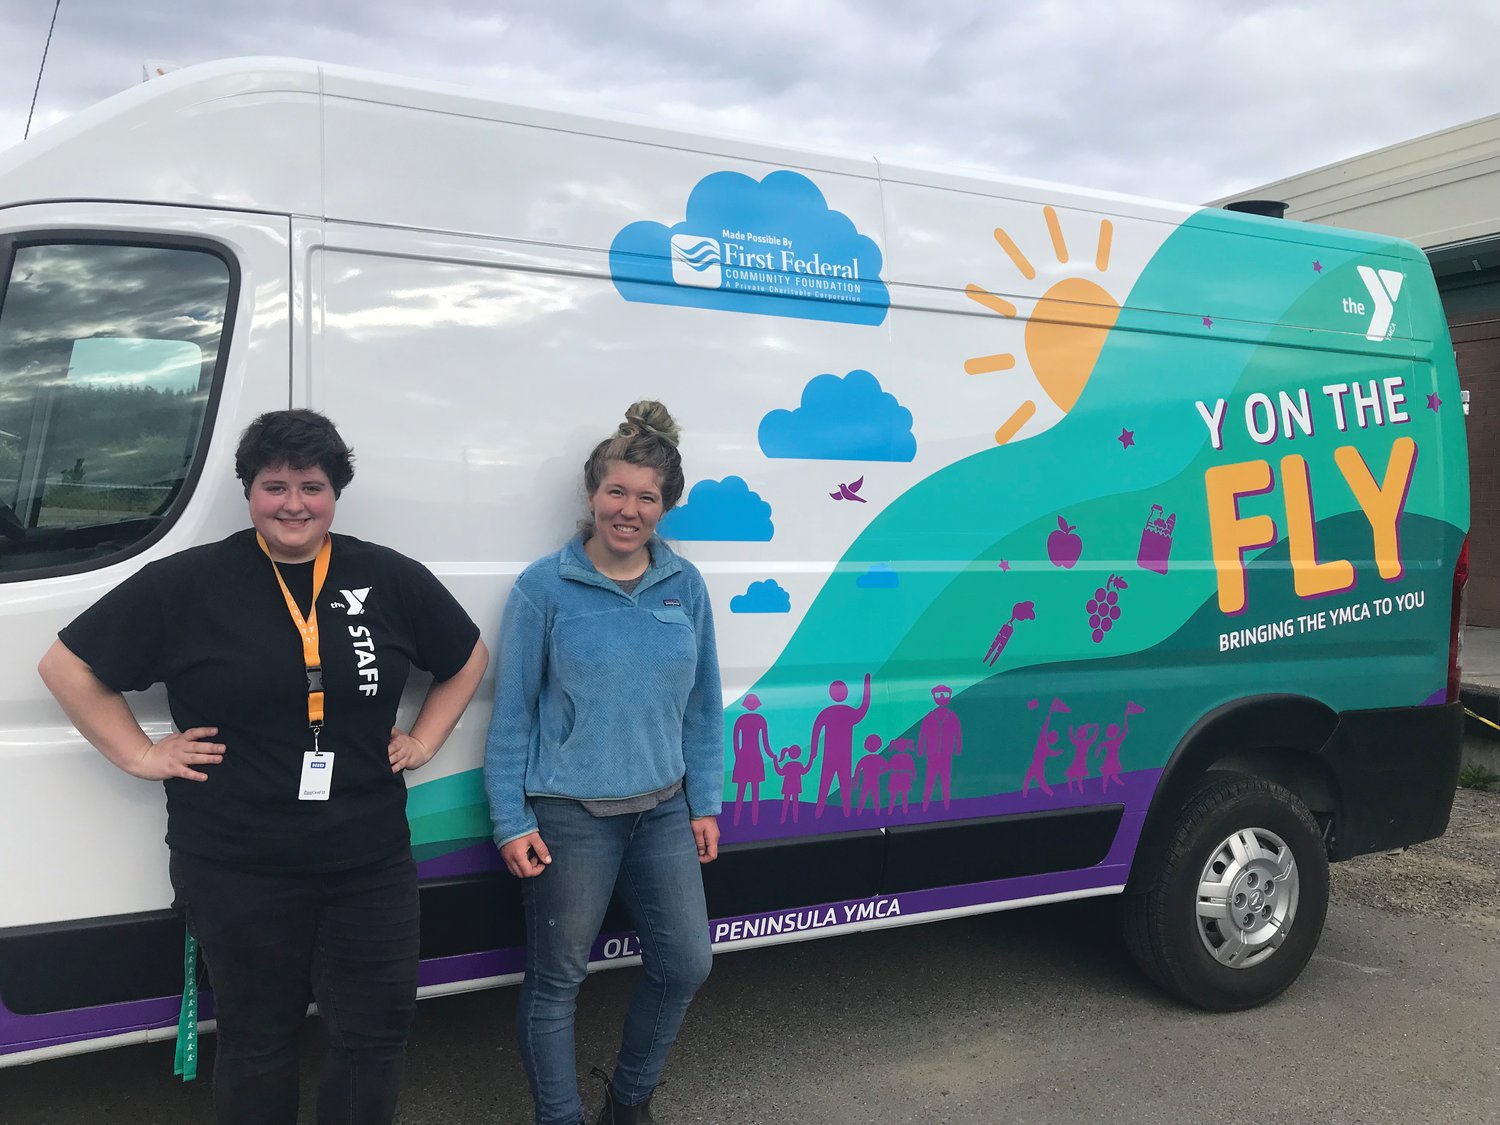 YMCA food security coordinator Sarah Henry and Kenzie Lemay, food security program aide, pose together with the YMCA’s new “Y on the Fly” food delivery van.